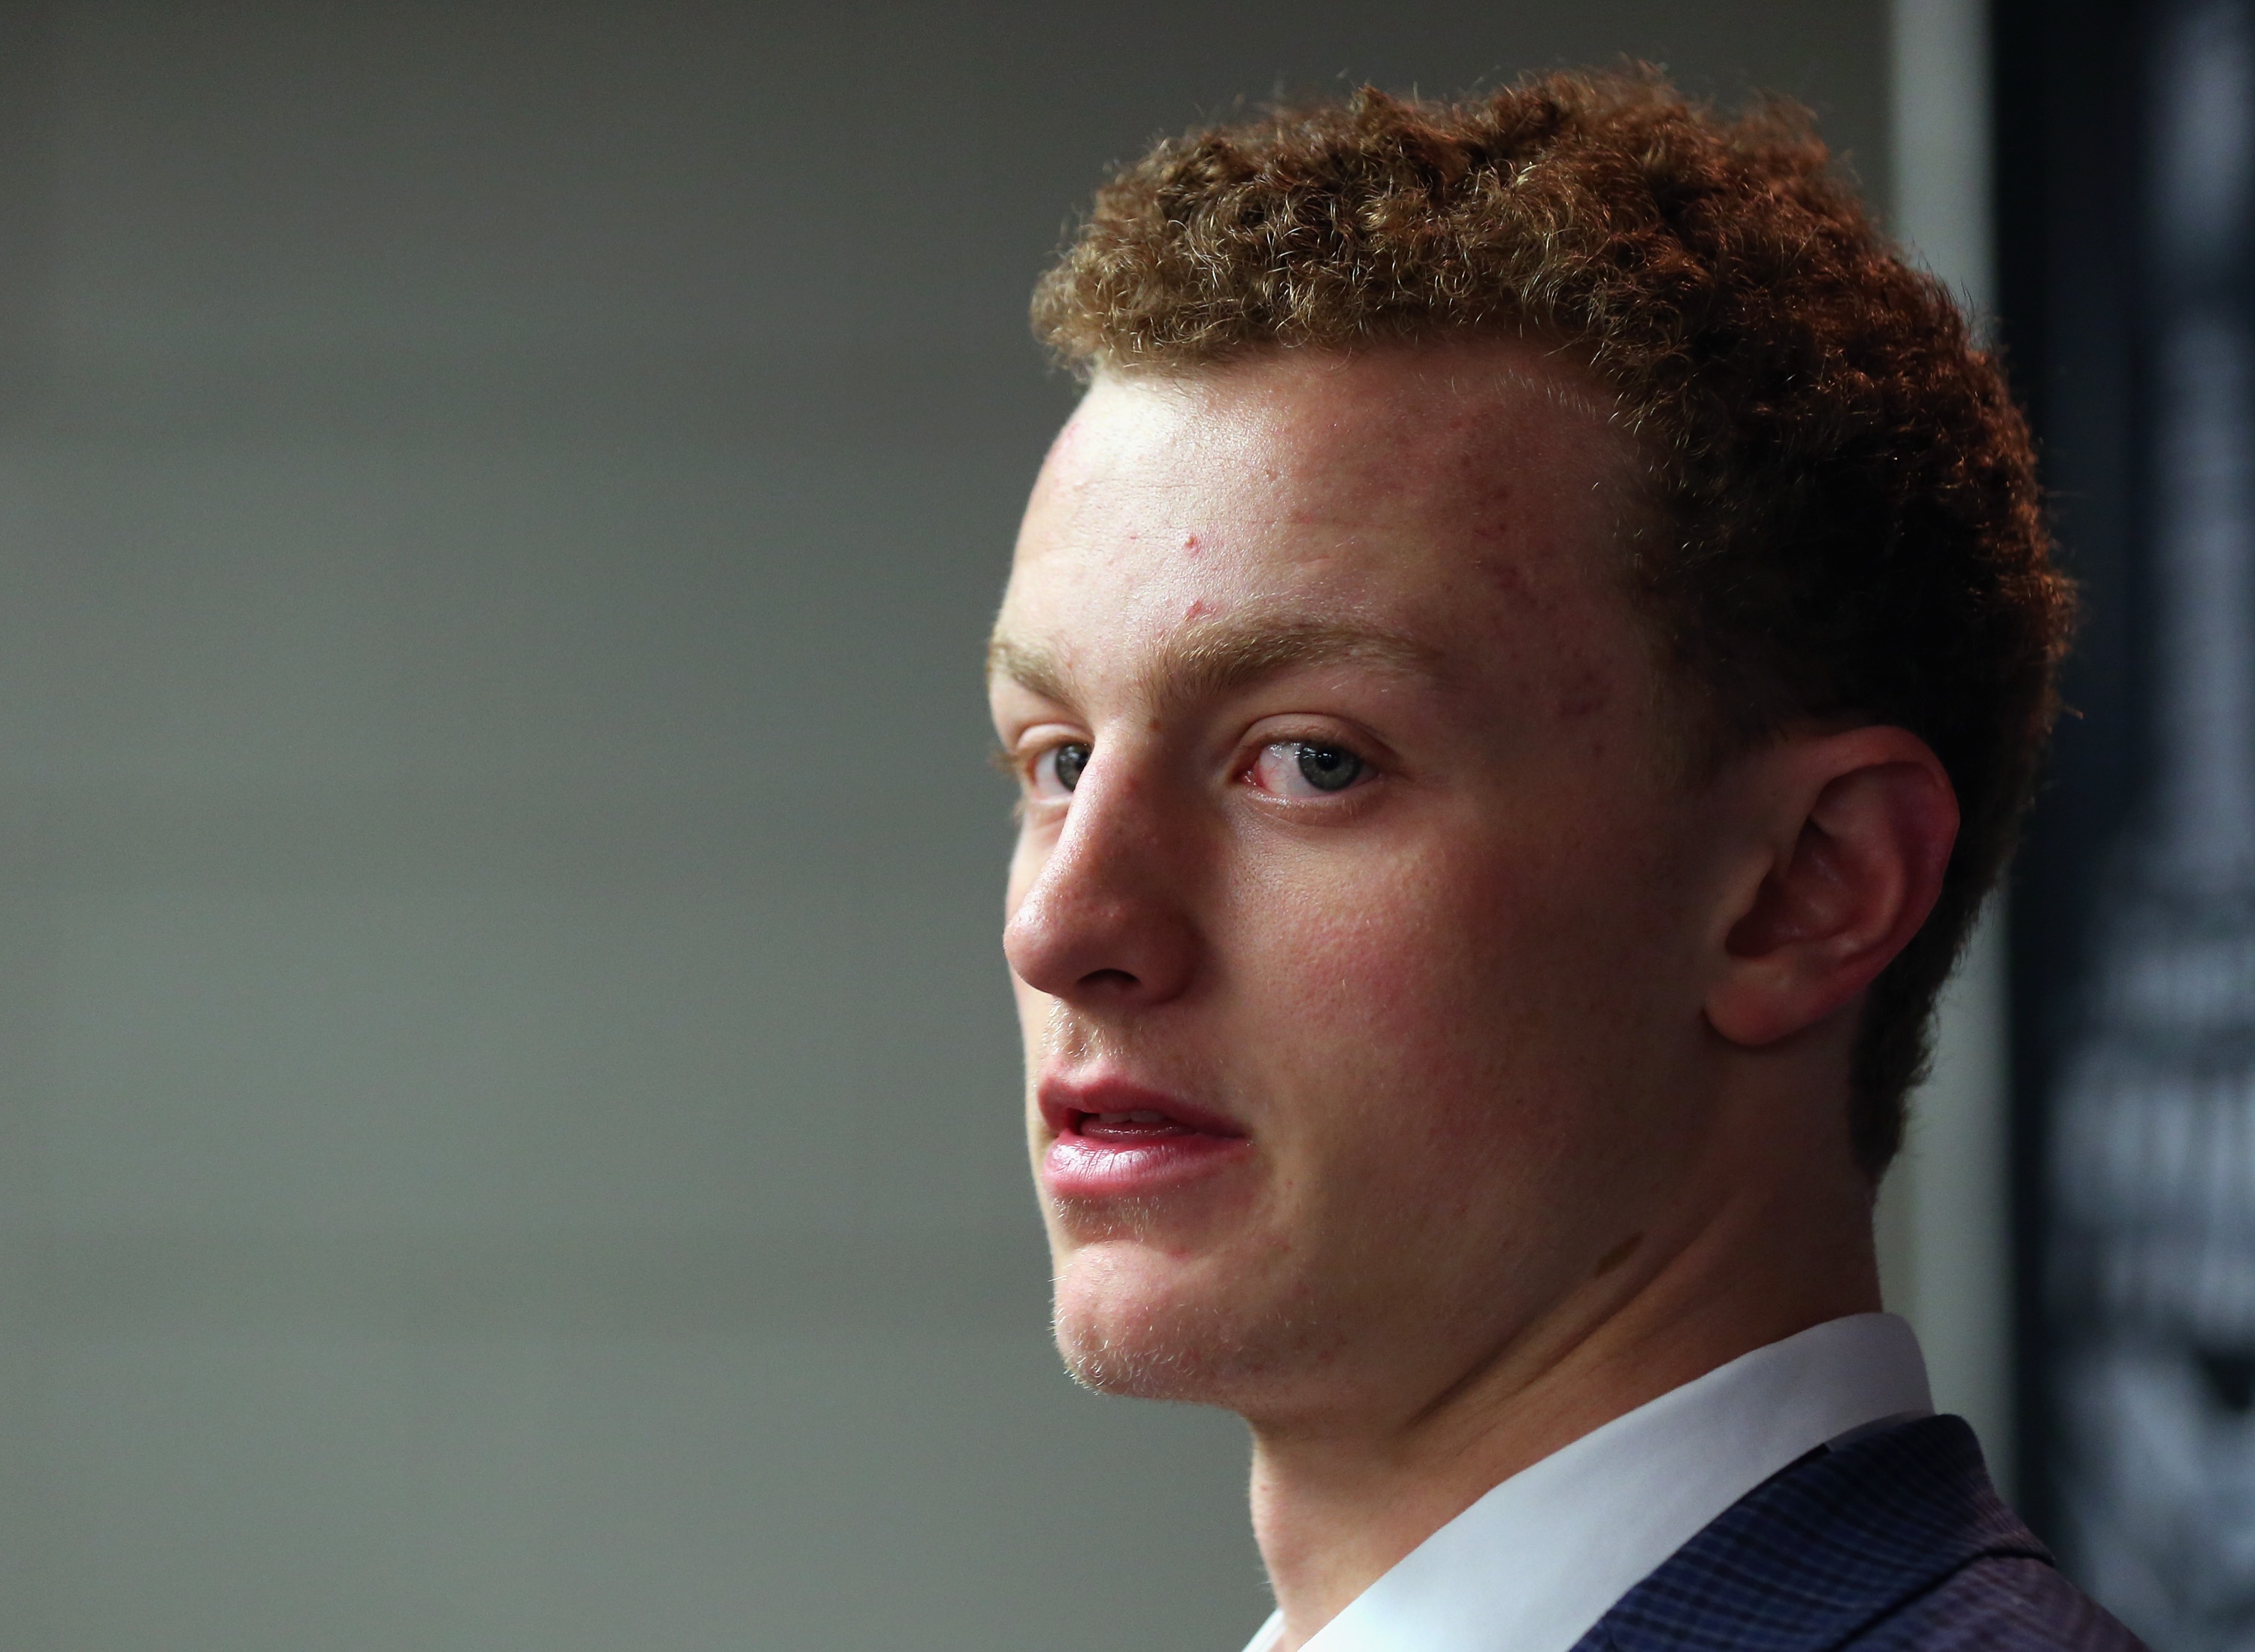 CHICAGO, IL - JUNE 08:  Upcoming NHL draft pick Jack Eichel speaks with the media during media availability at United Center on June 8, 2015 in Chicago, Illinois.  (Photo by Bruce Bennett/Getty Images)